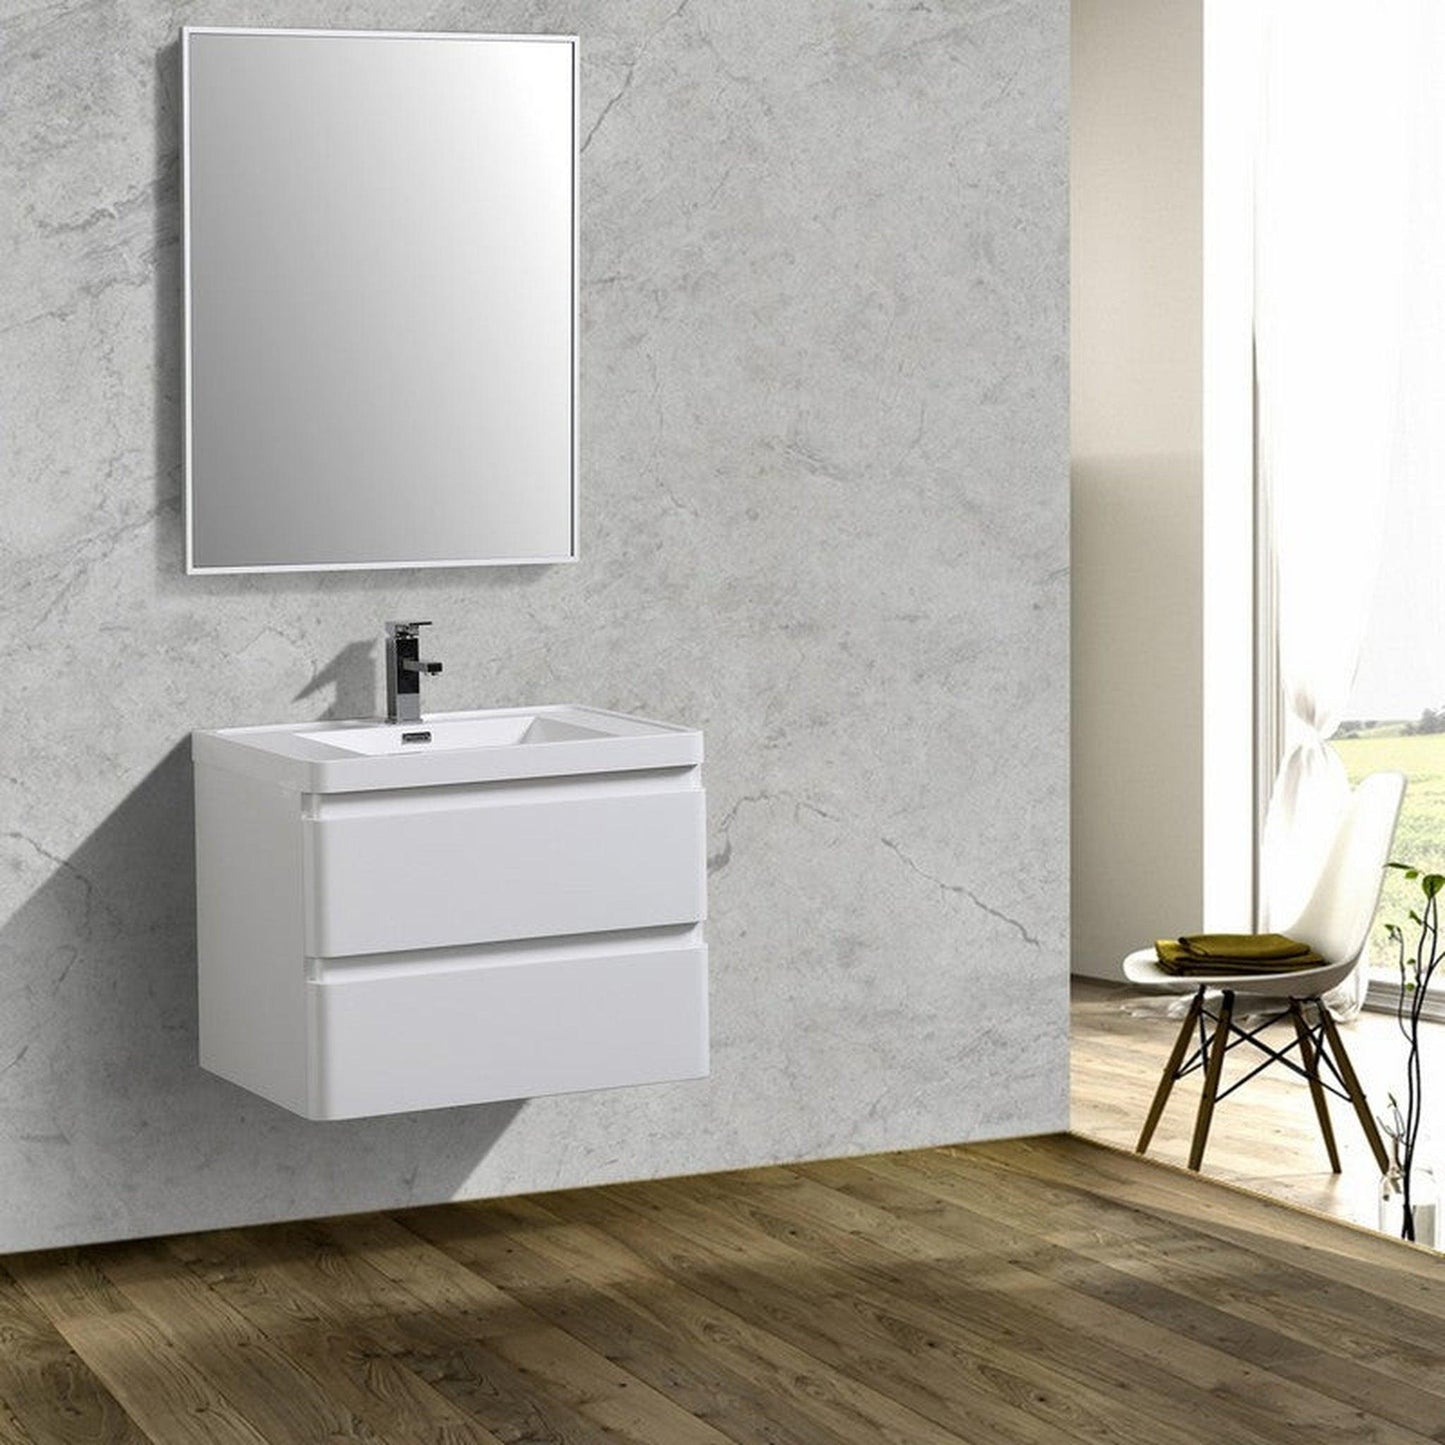 Eviva Glazzy 28" x 21" White Wall Mount Bathroom Vanity with White Single Integrated Sink